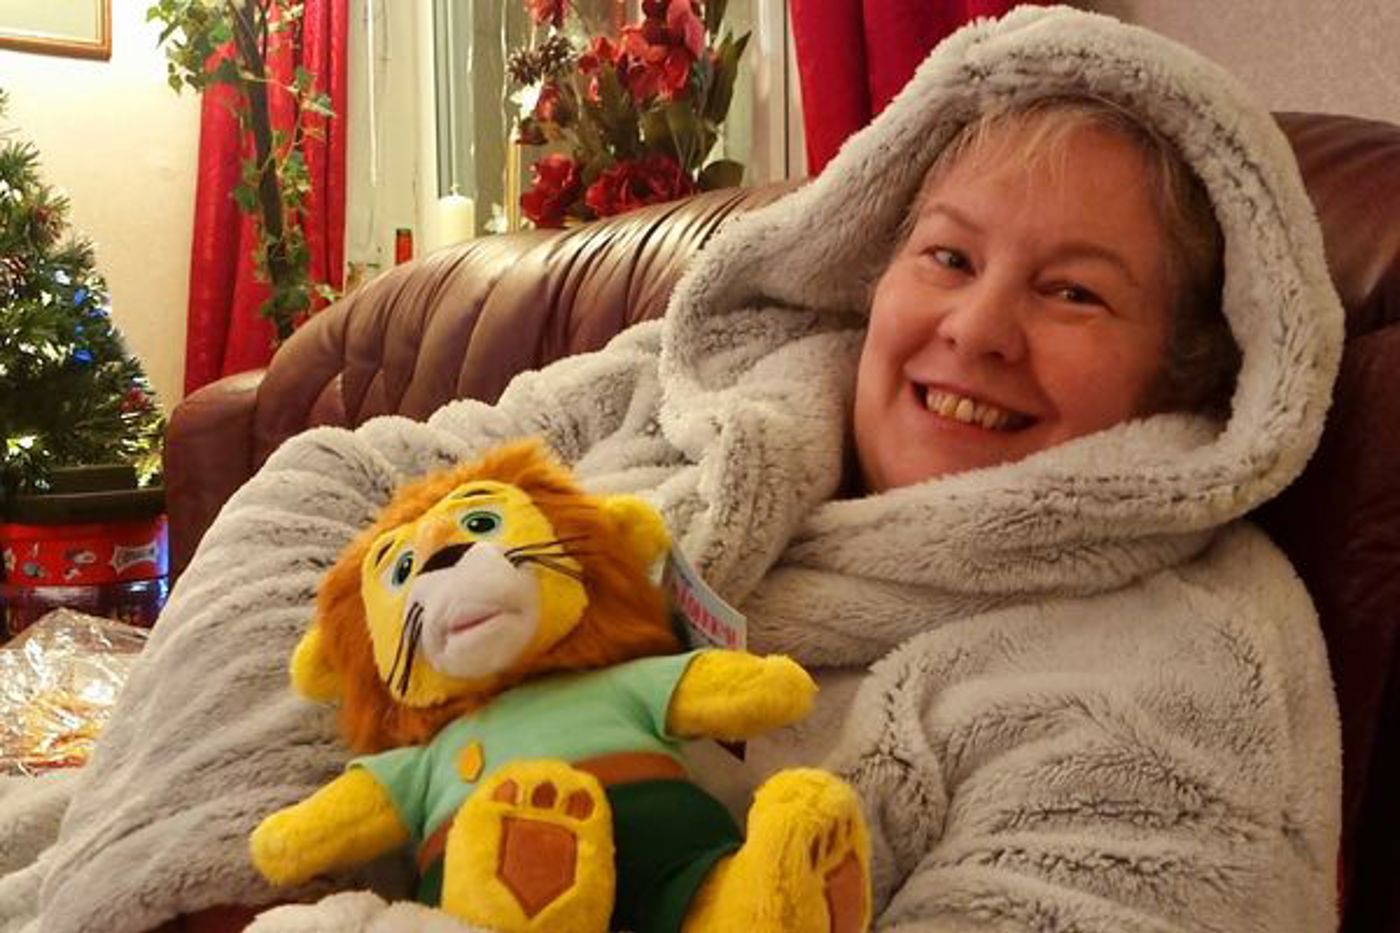 A smiling woman holding a soft toy lion